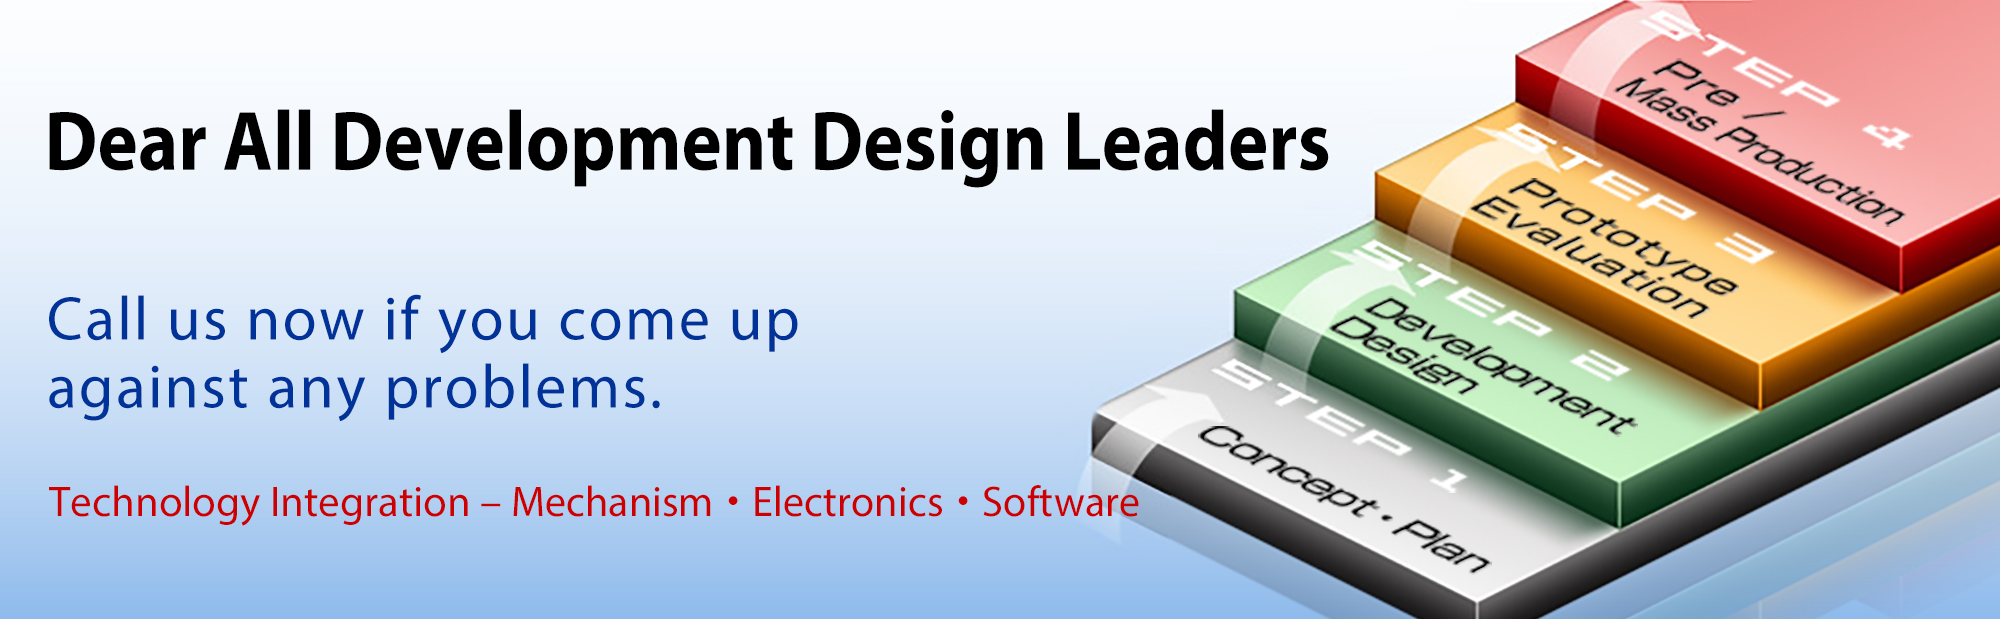 Dear All Development Design Leaders. Call us now if you come up against any problems. Technology Integration - Mechanism/Electronics/Software 